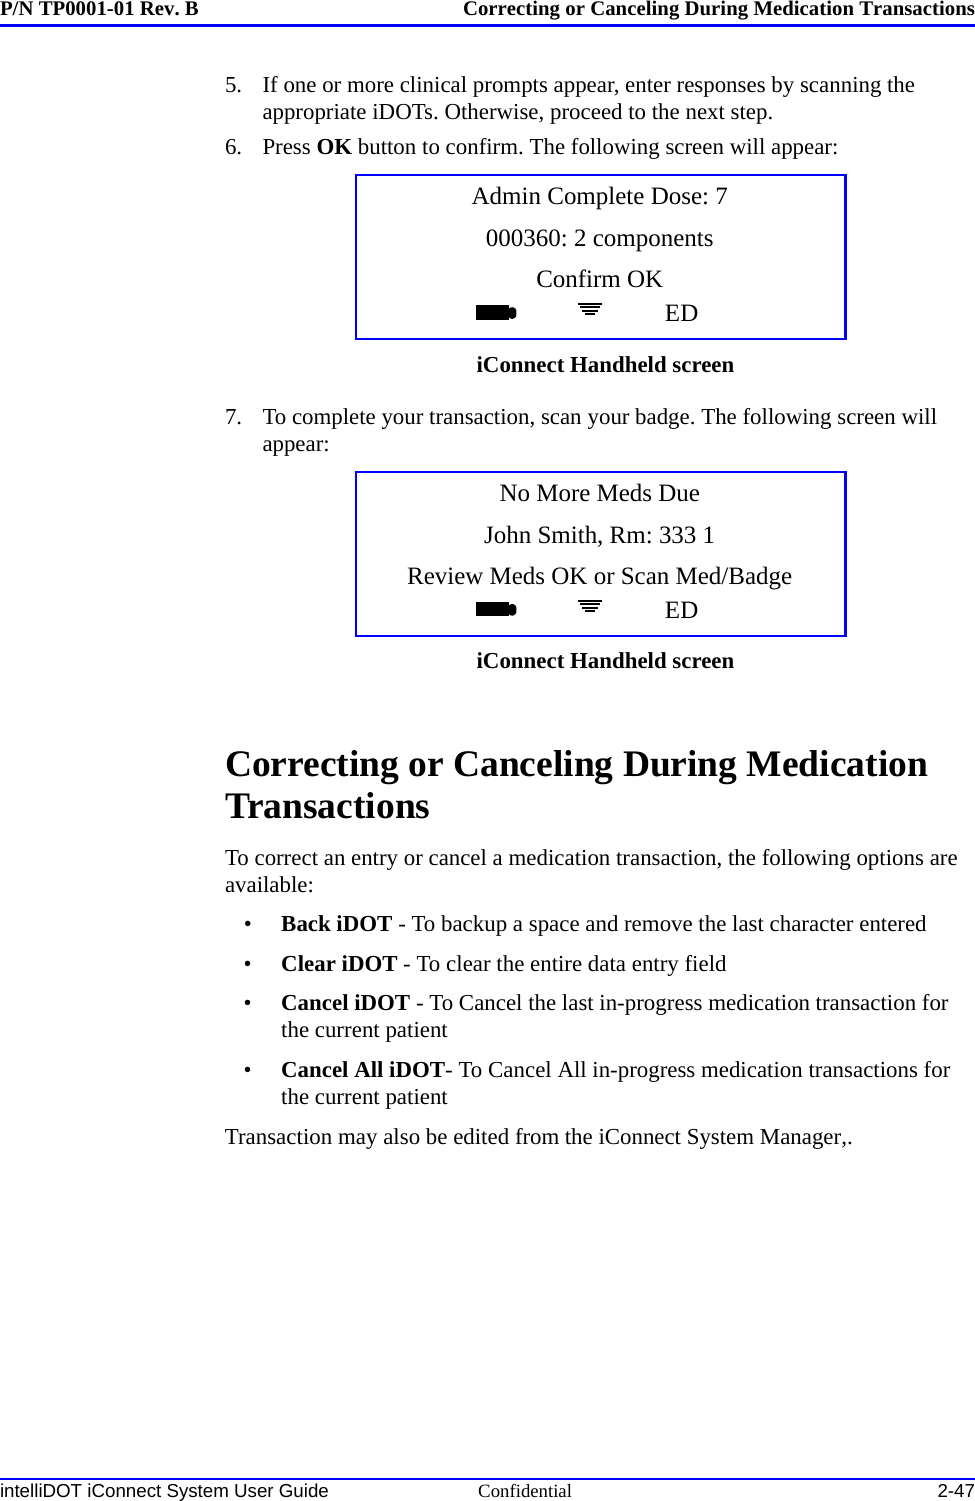 P/N TP0001-01 Rev. B Correcting or Canceling During Medication TransactionsintelliDOT iConnect System User Guide Confidential 2-475. If one or more clinical prompts appear, enter responses by scanning the appropriate iDOTs. Otherwise, proceed to the next step.6. Press OK button to confirm. The following screen will appear:7. To complete your transaction, scan your badge. The following screen will appear:Correcting or Canceling During Medication TransactionsTo correct an entry or cancel a medication transaction, the following options are available:•Back iDOT - To backup a space and remove the last character entered•Clear iDOT - To clear the entire data entry field•Cancel iDOT - To Cancel the last in-progress medication transaction for the current patient•Cancel All iDOT- To Cancel All in-progress medication transactions for the current patientTransaction may also be edited from the iConnect System Manager,.Admin Complete Dose: 7000360: 2 componentsConfirm OKEDiConnect Handheld screenNo More Meds DueJohn Smith, Rm: 333 1Review Meds OK or Scan Med/BadgeEDiConnect Handheld screen